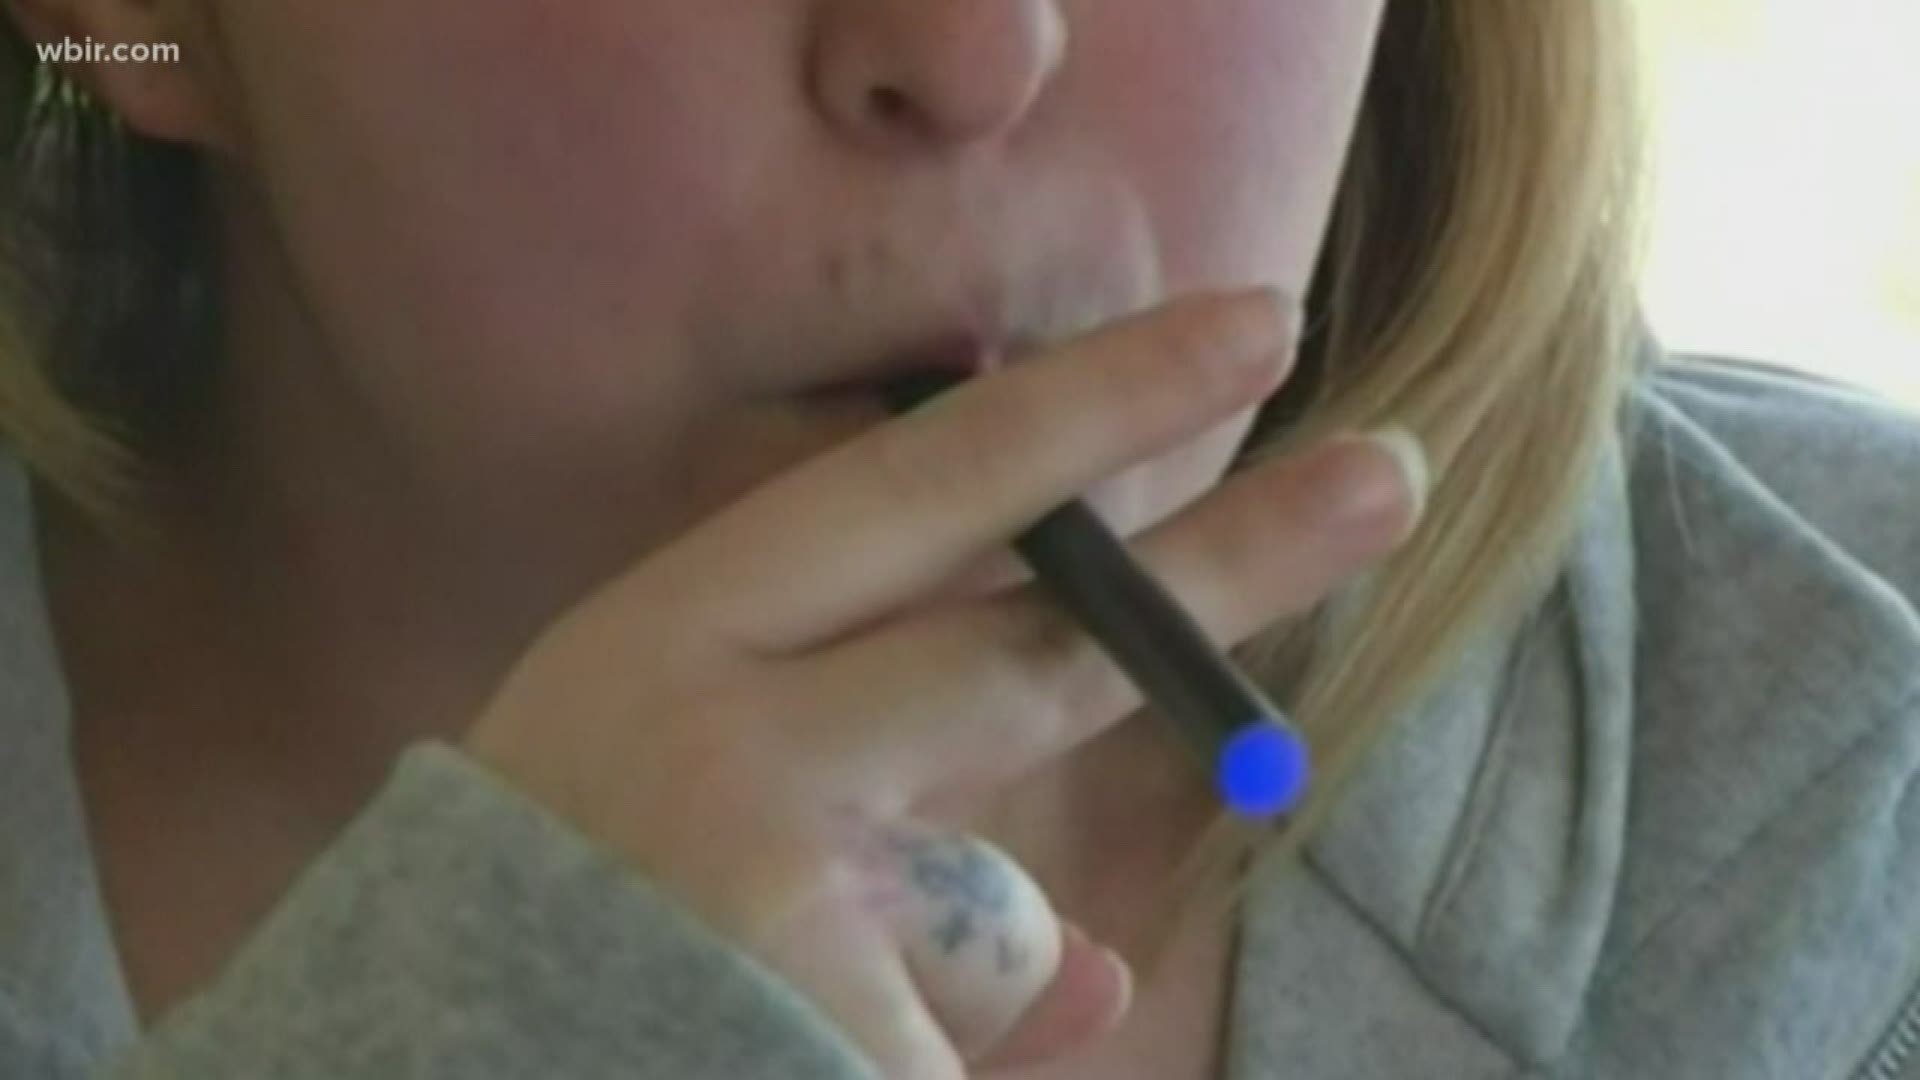 We're hearing a new warning tonight about the the risk of e-cigarrettes. A hospital in Wisconsin said it treated eight teenagers for injuries to their lungs, and they suspect their problems are tied to vaping.